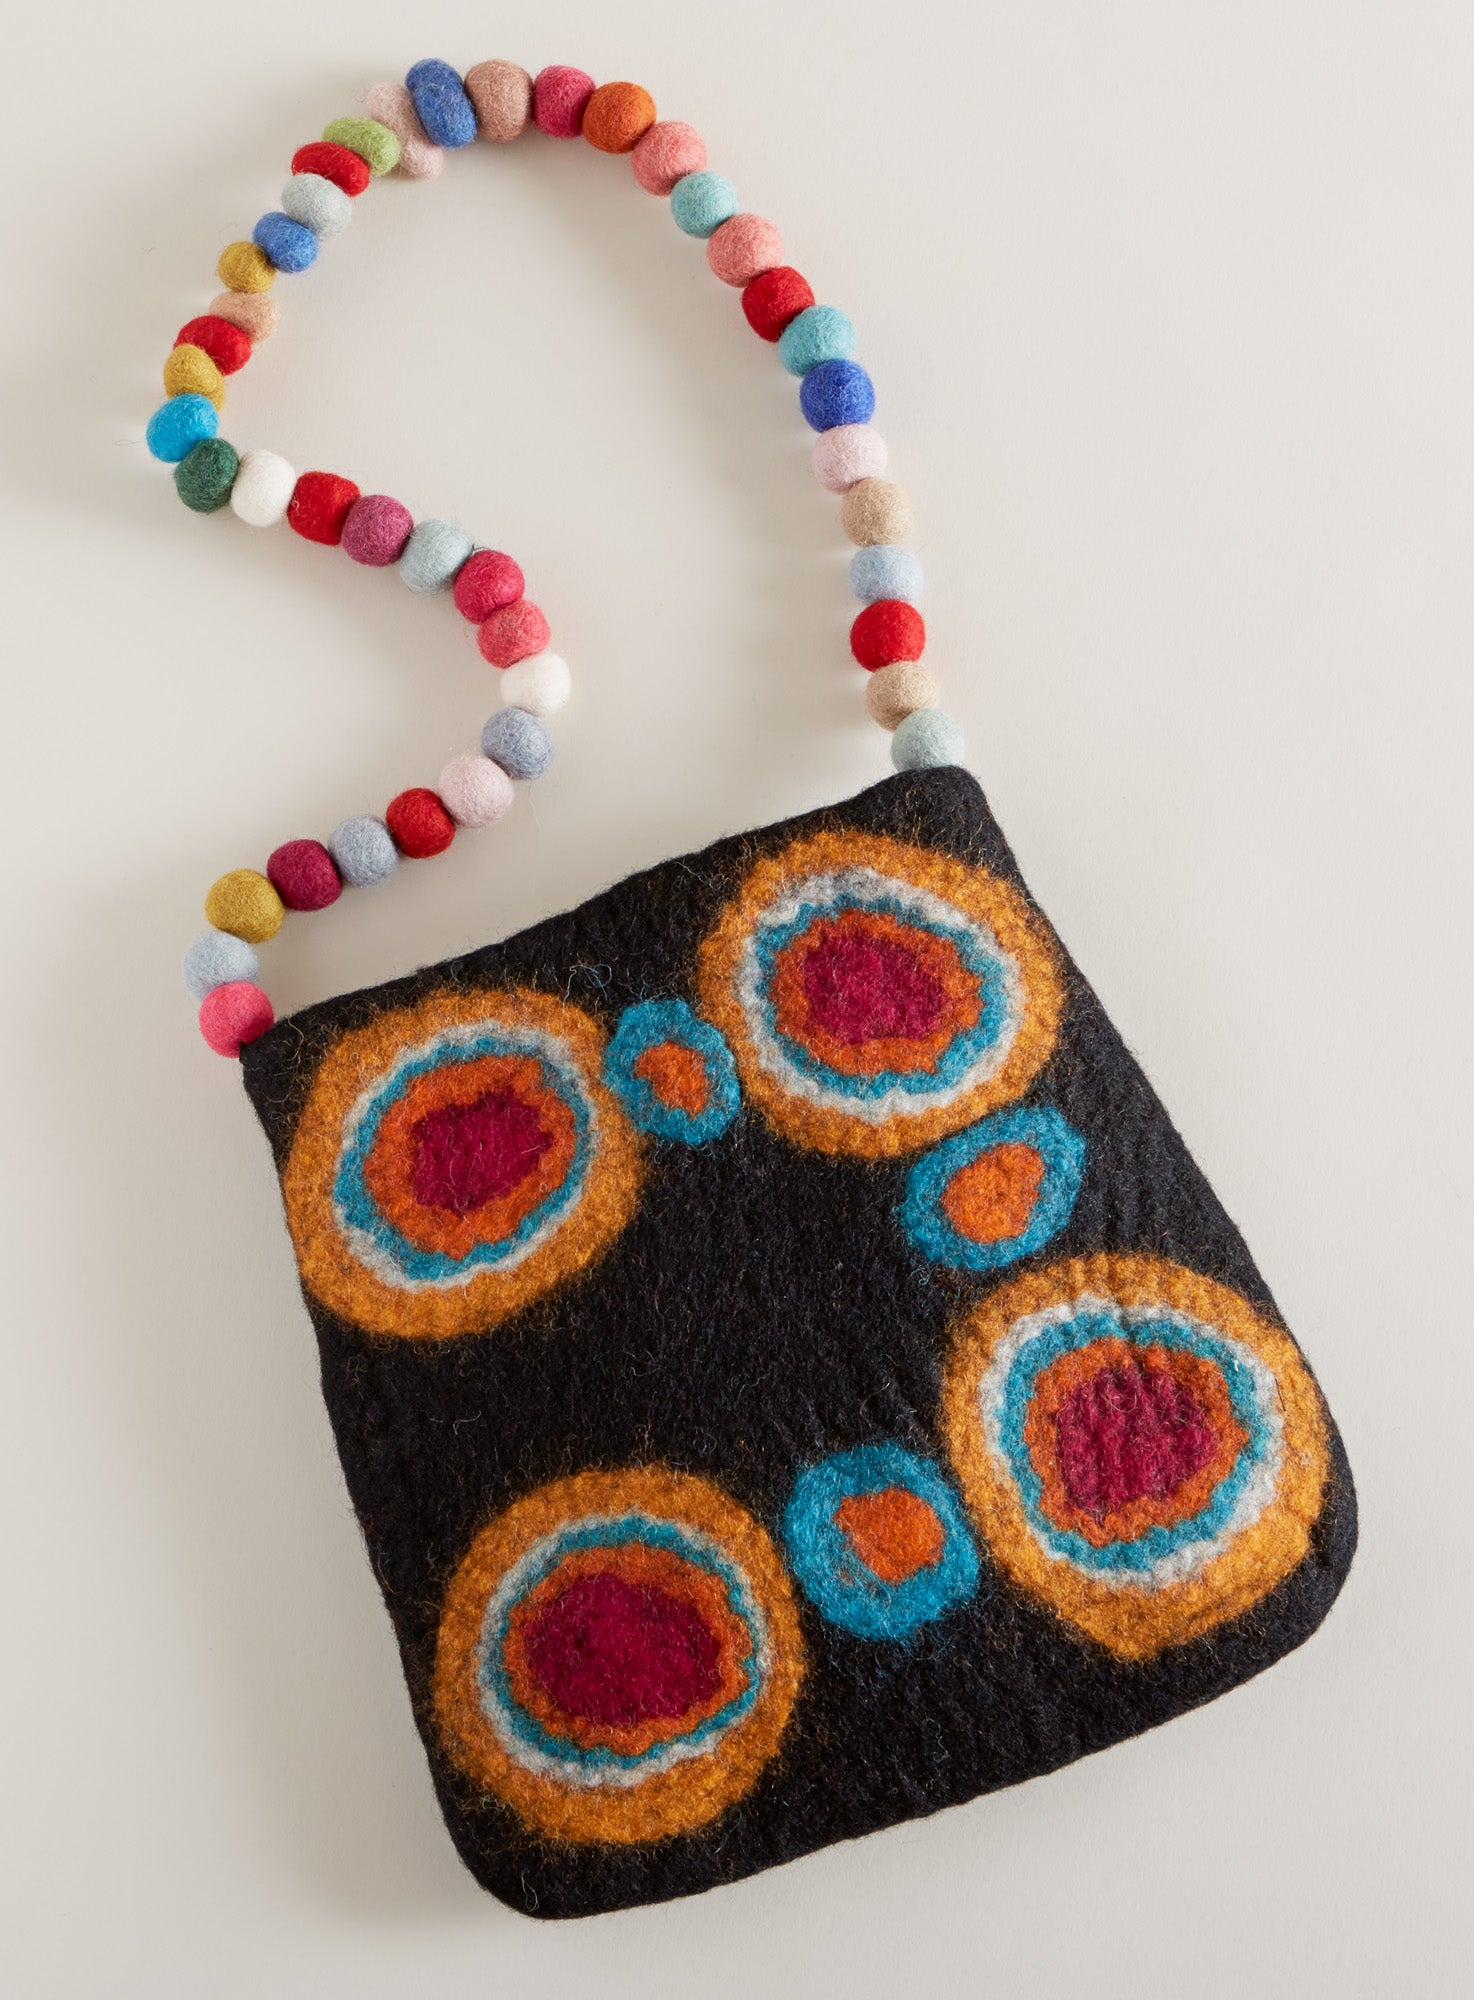 Knit Felted Purse · A Handbag · Felting and Knitting on Cut Out + Keep